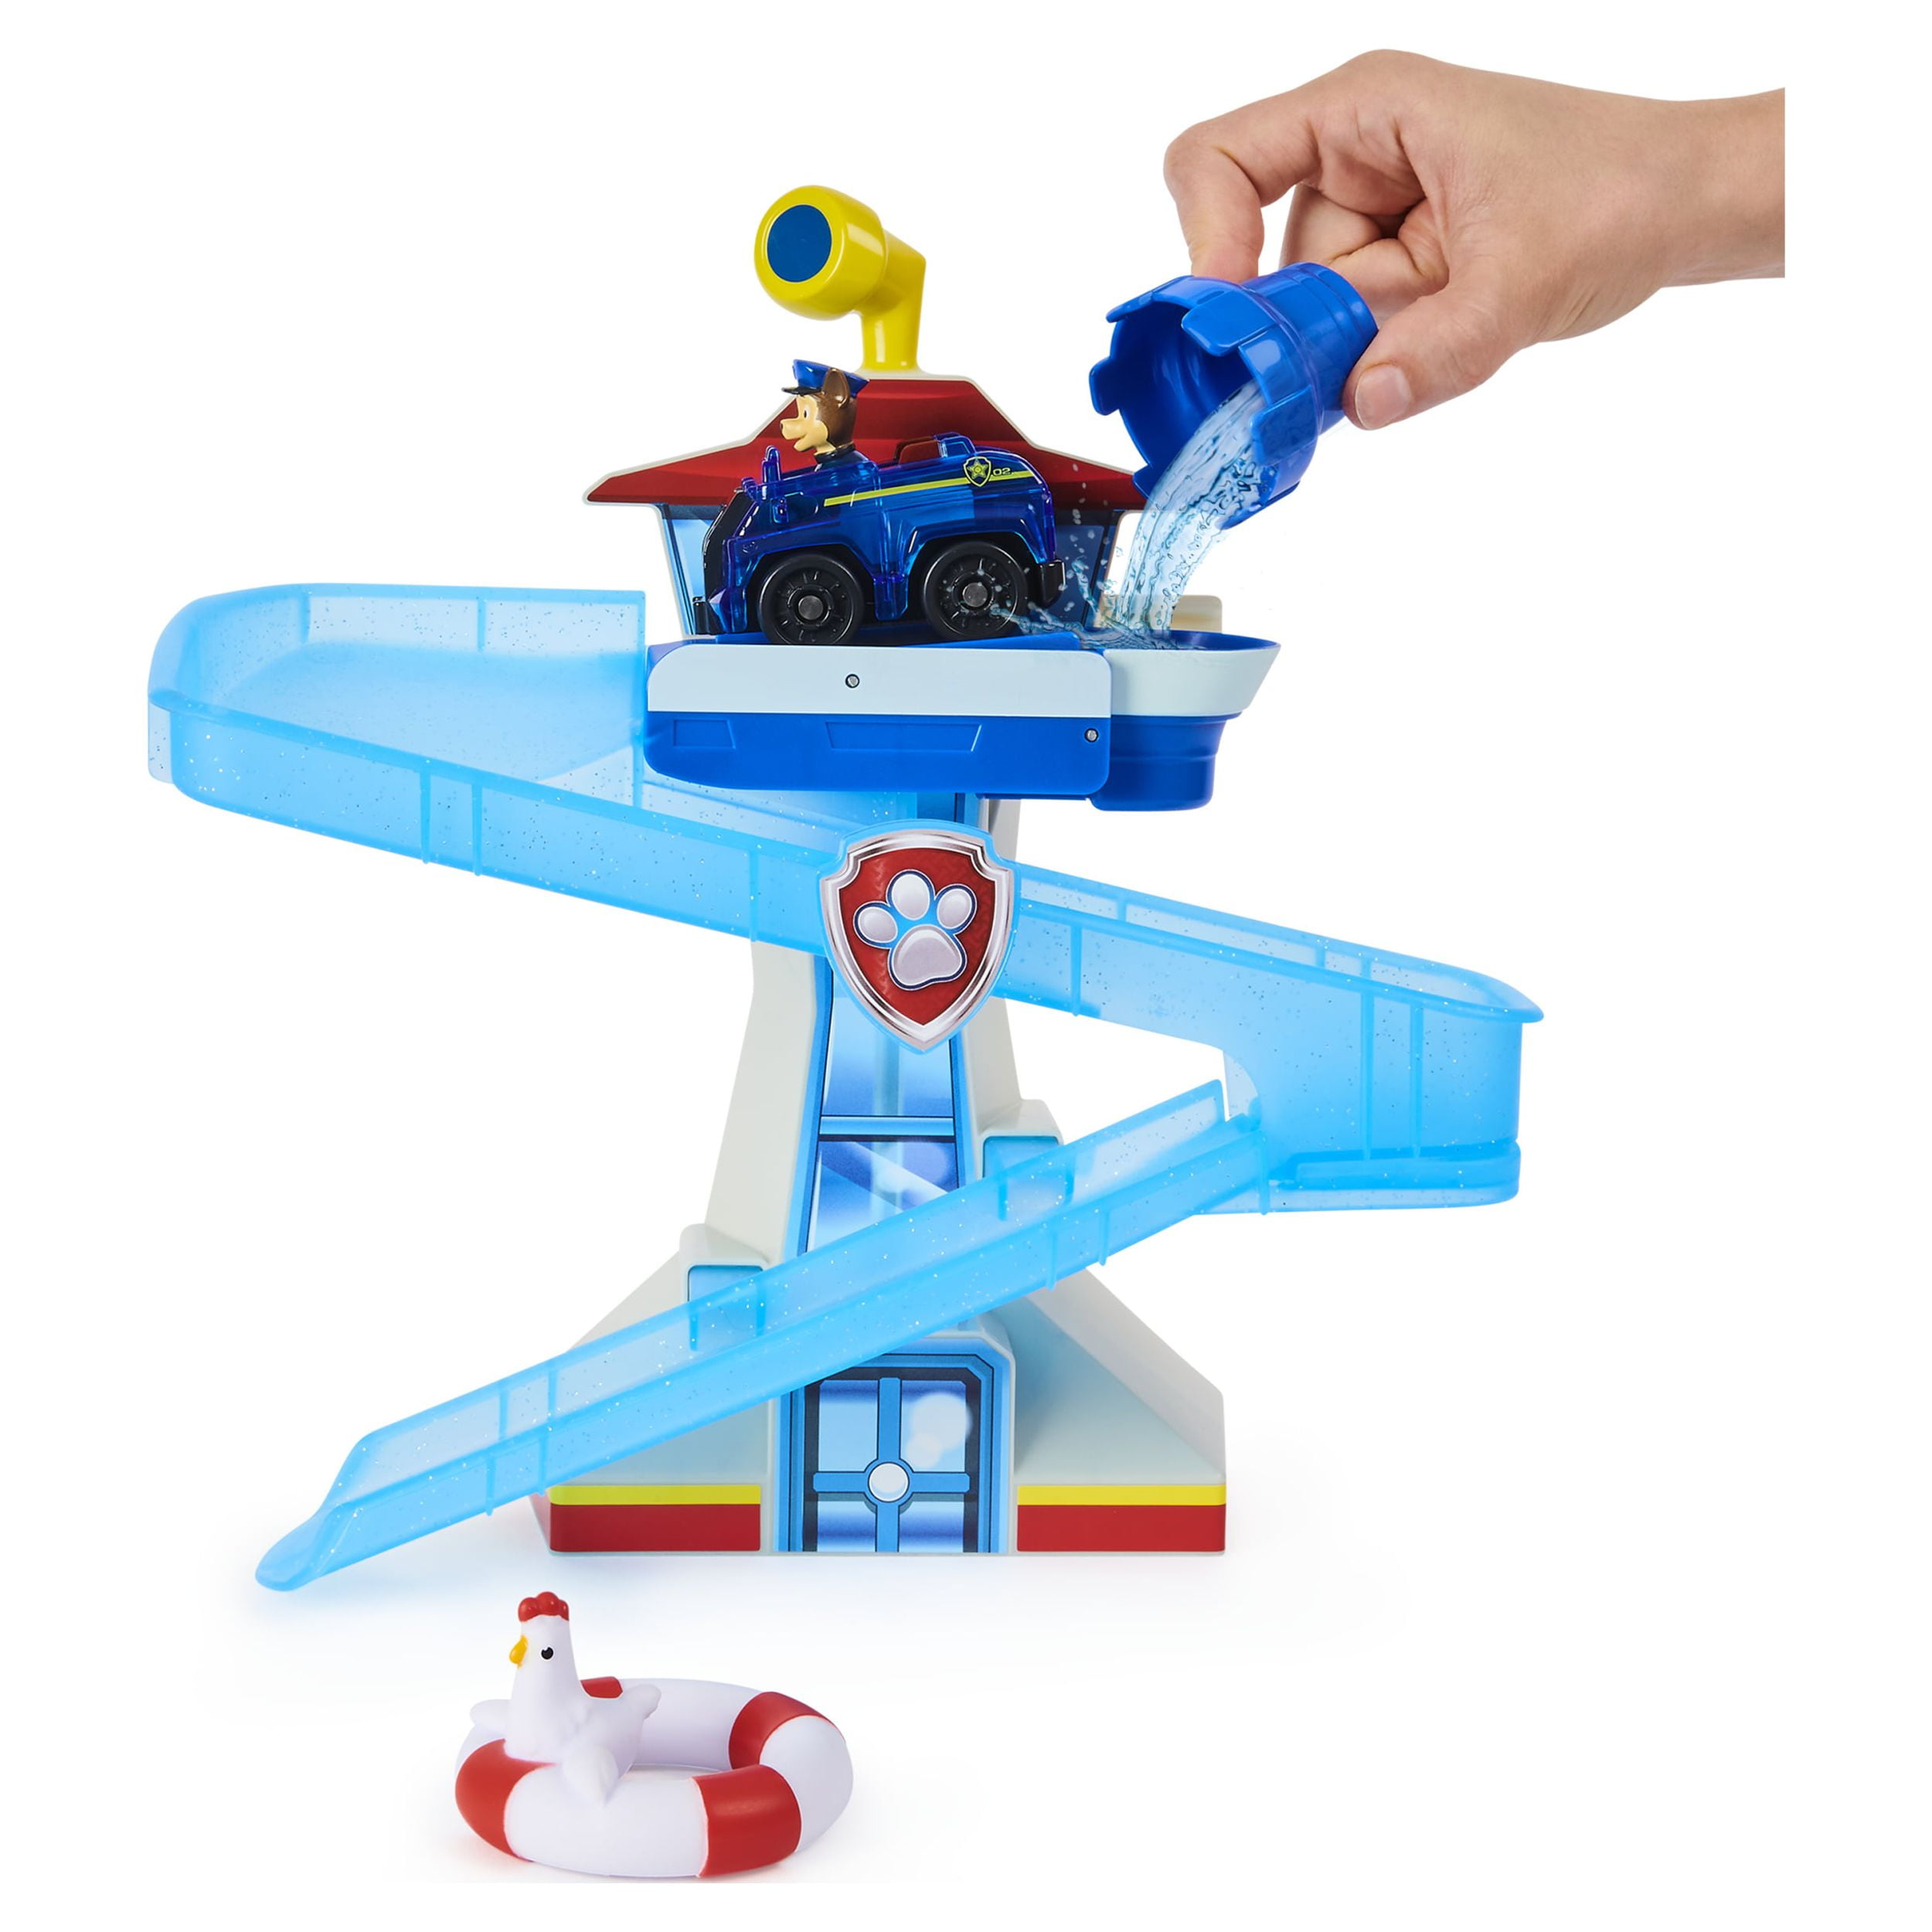 Paw Patrol, Adventure Bay Bath Playset with Light-up Chase Vehicle, Bath  Toy for Kids Aged 3 and up